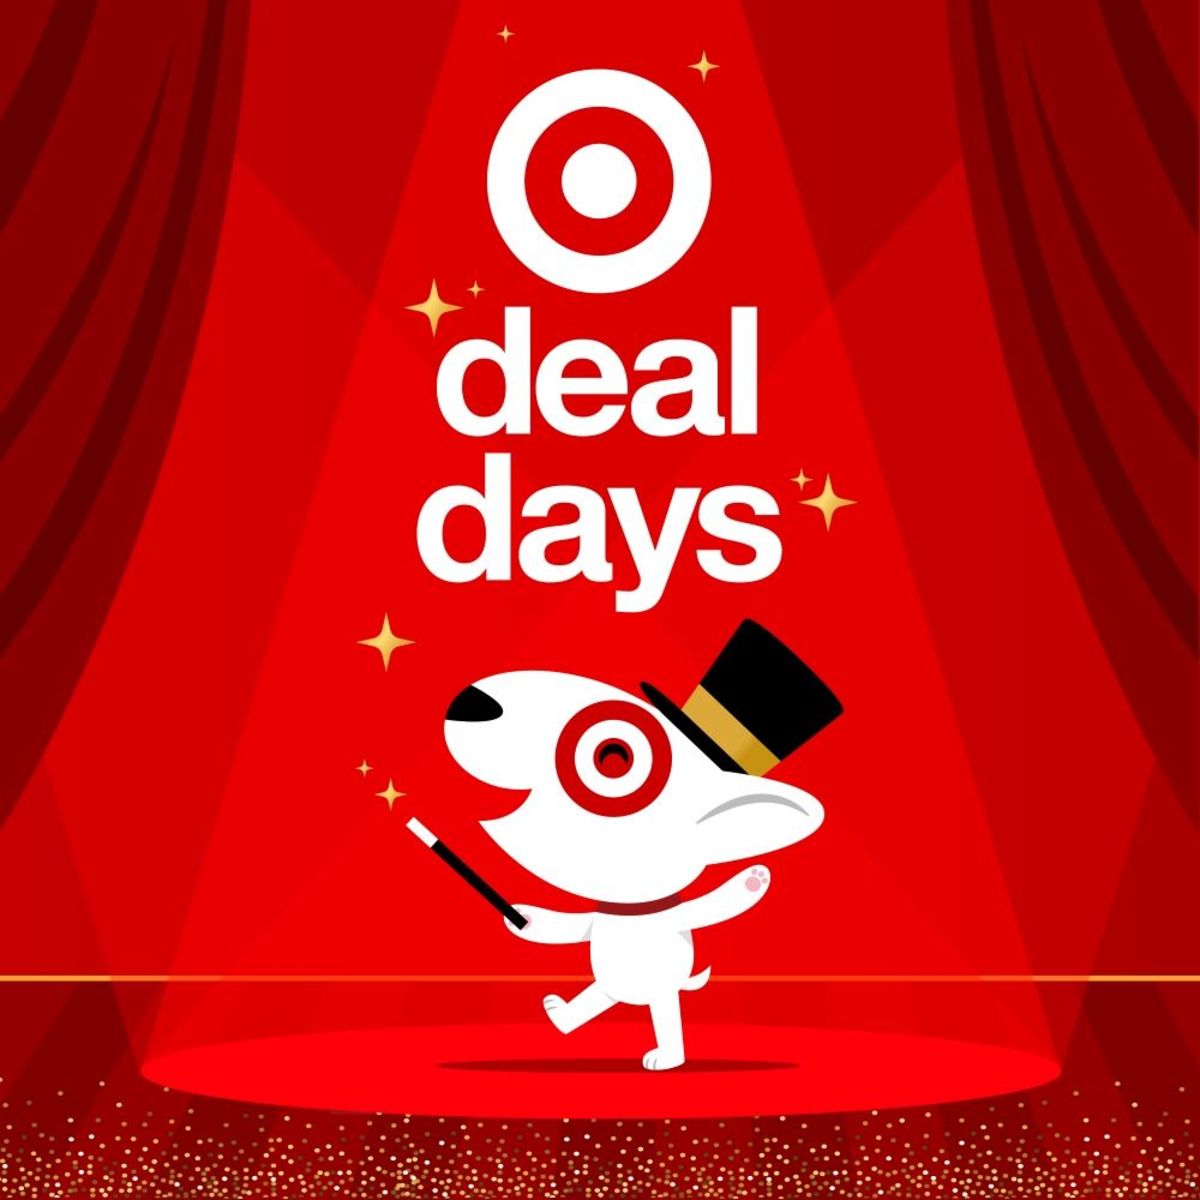 Target Deal Days are back: Here’s what to expect